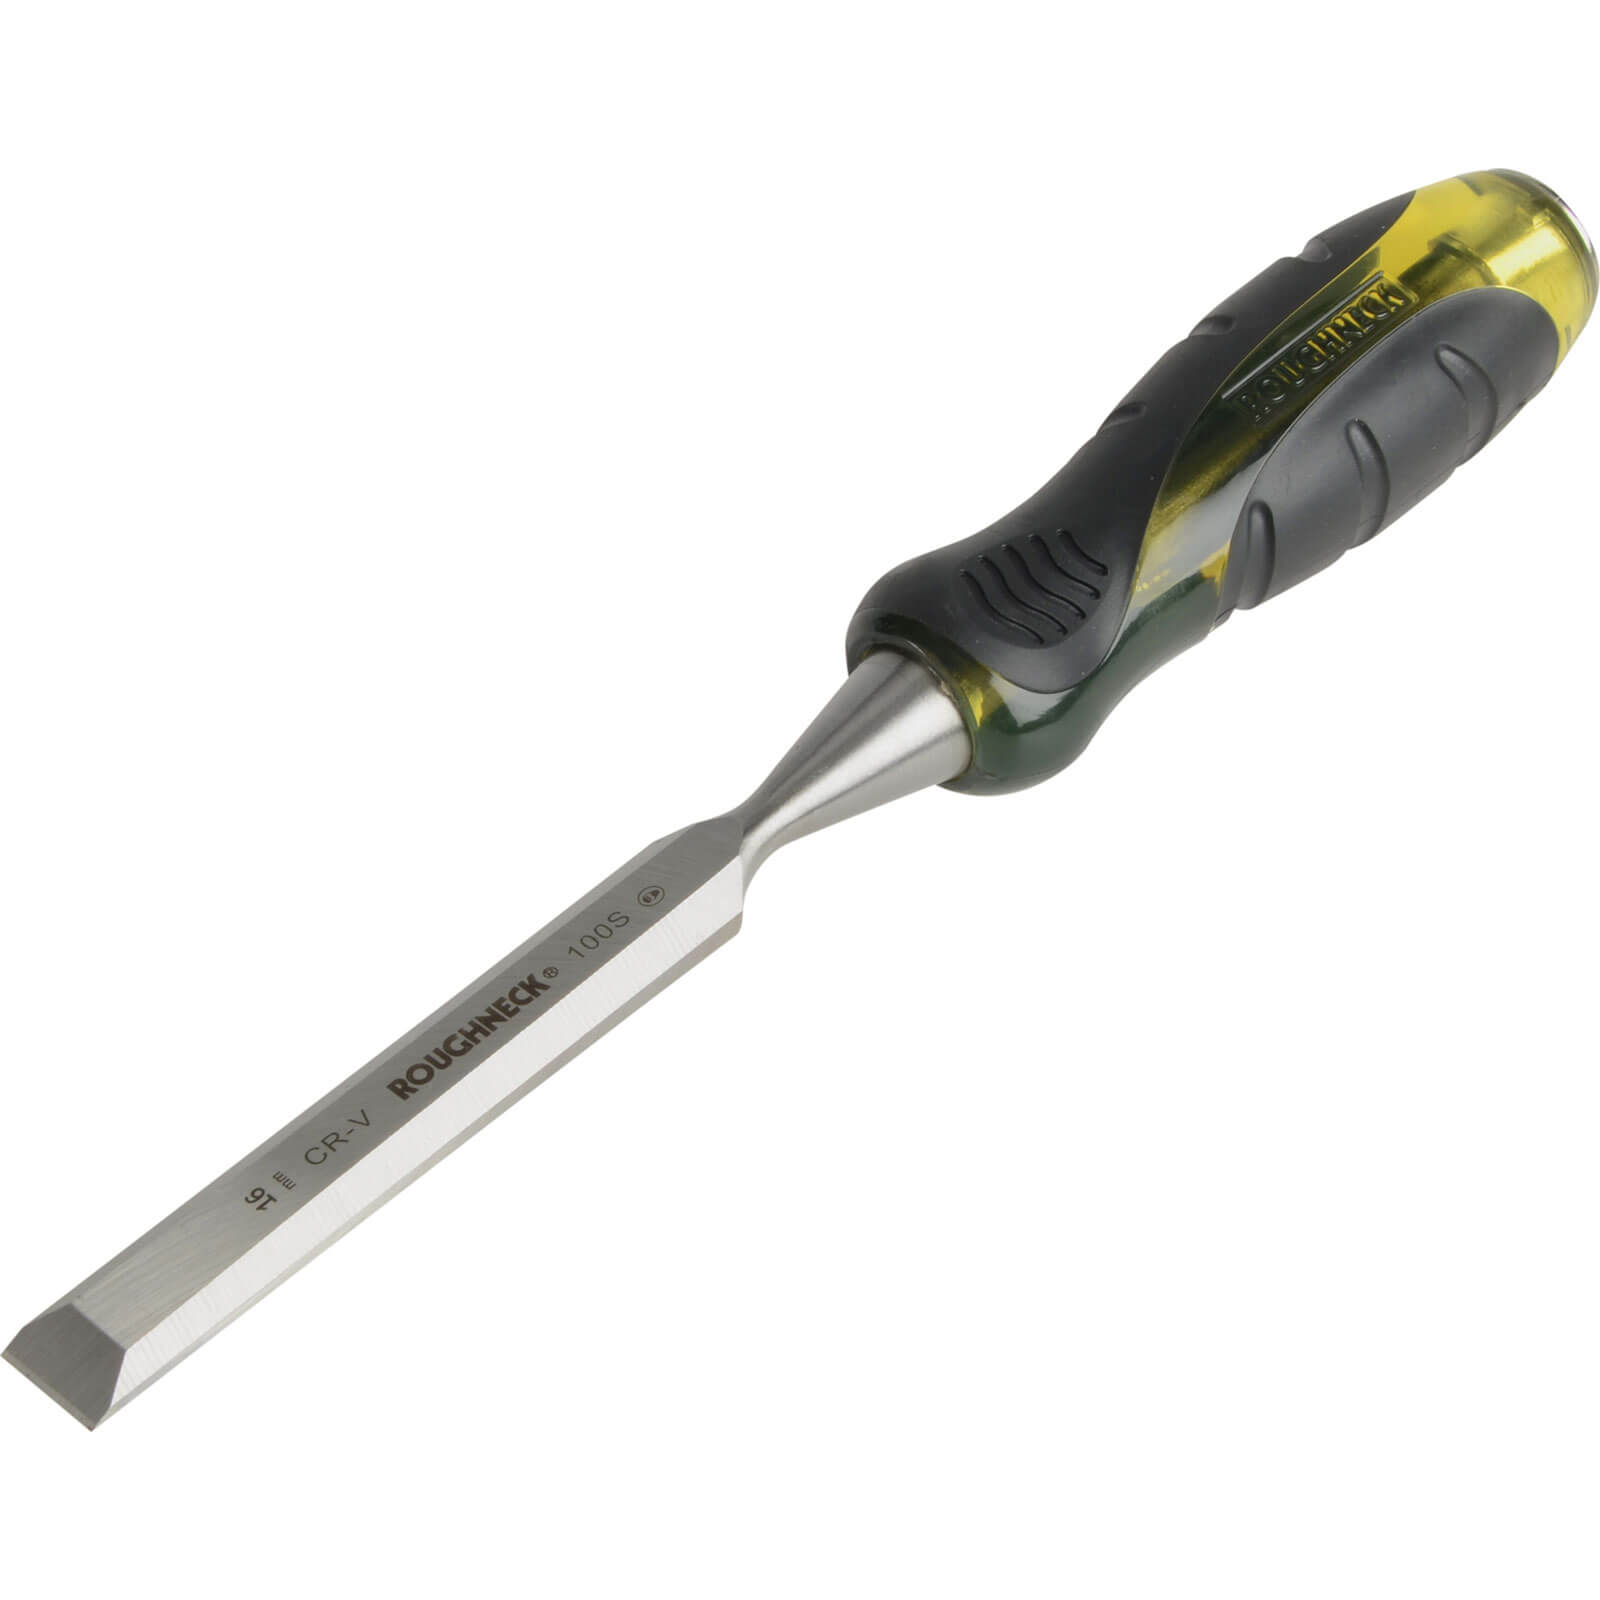 Image of Roughneck Professional Bevel Edge Wood Chisel 16mm